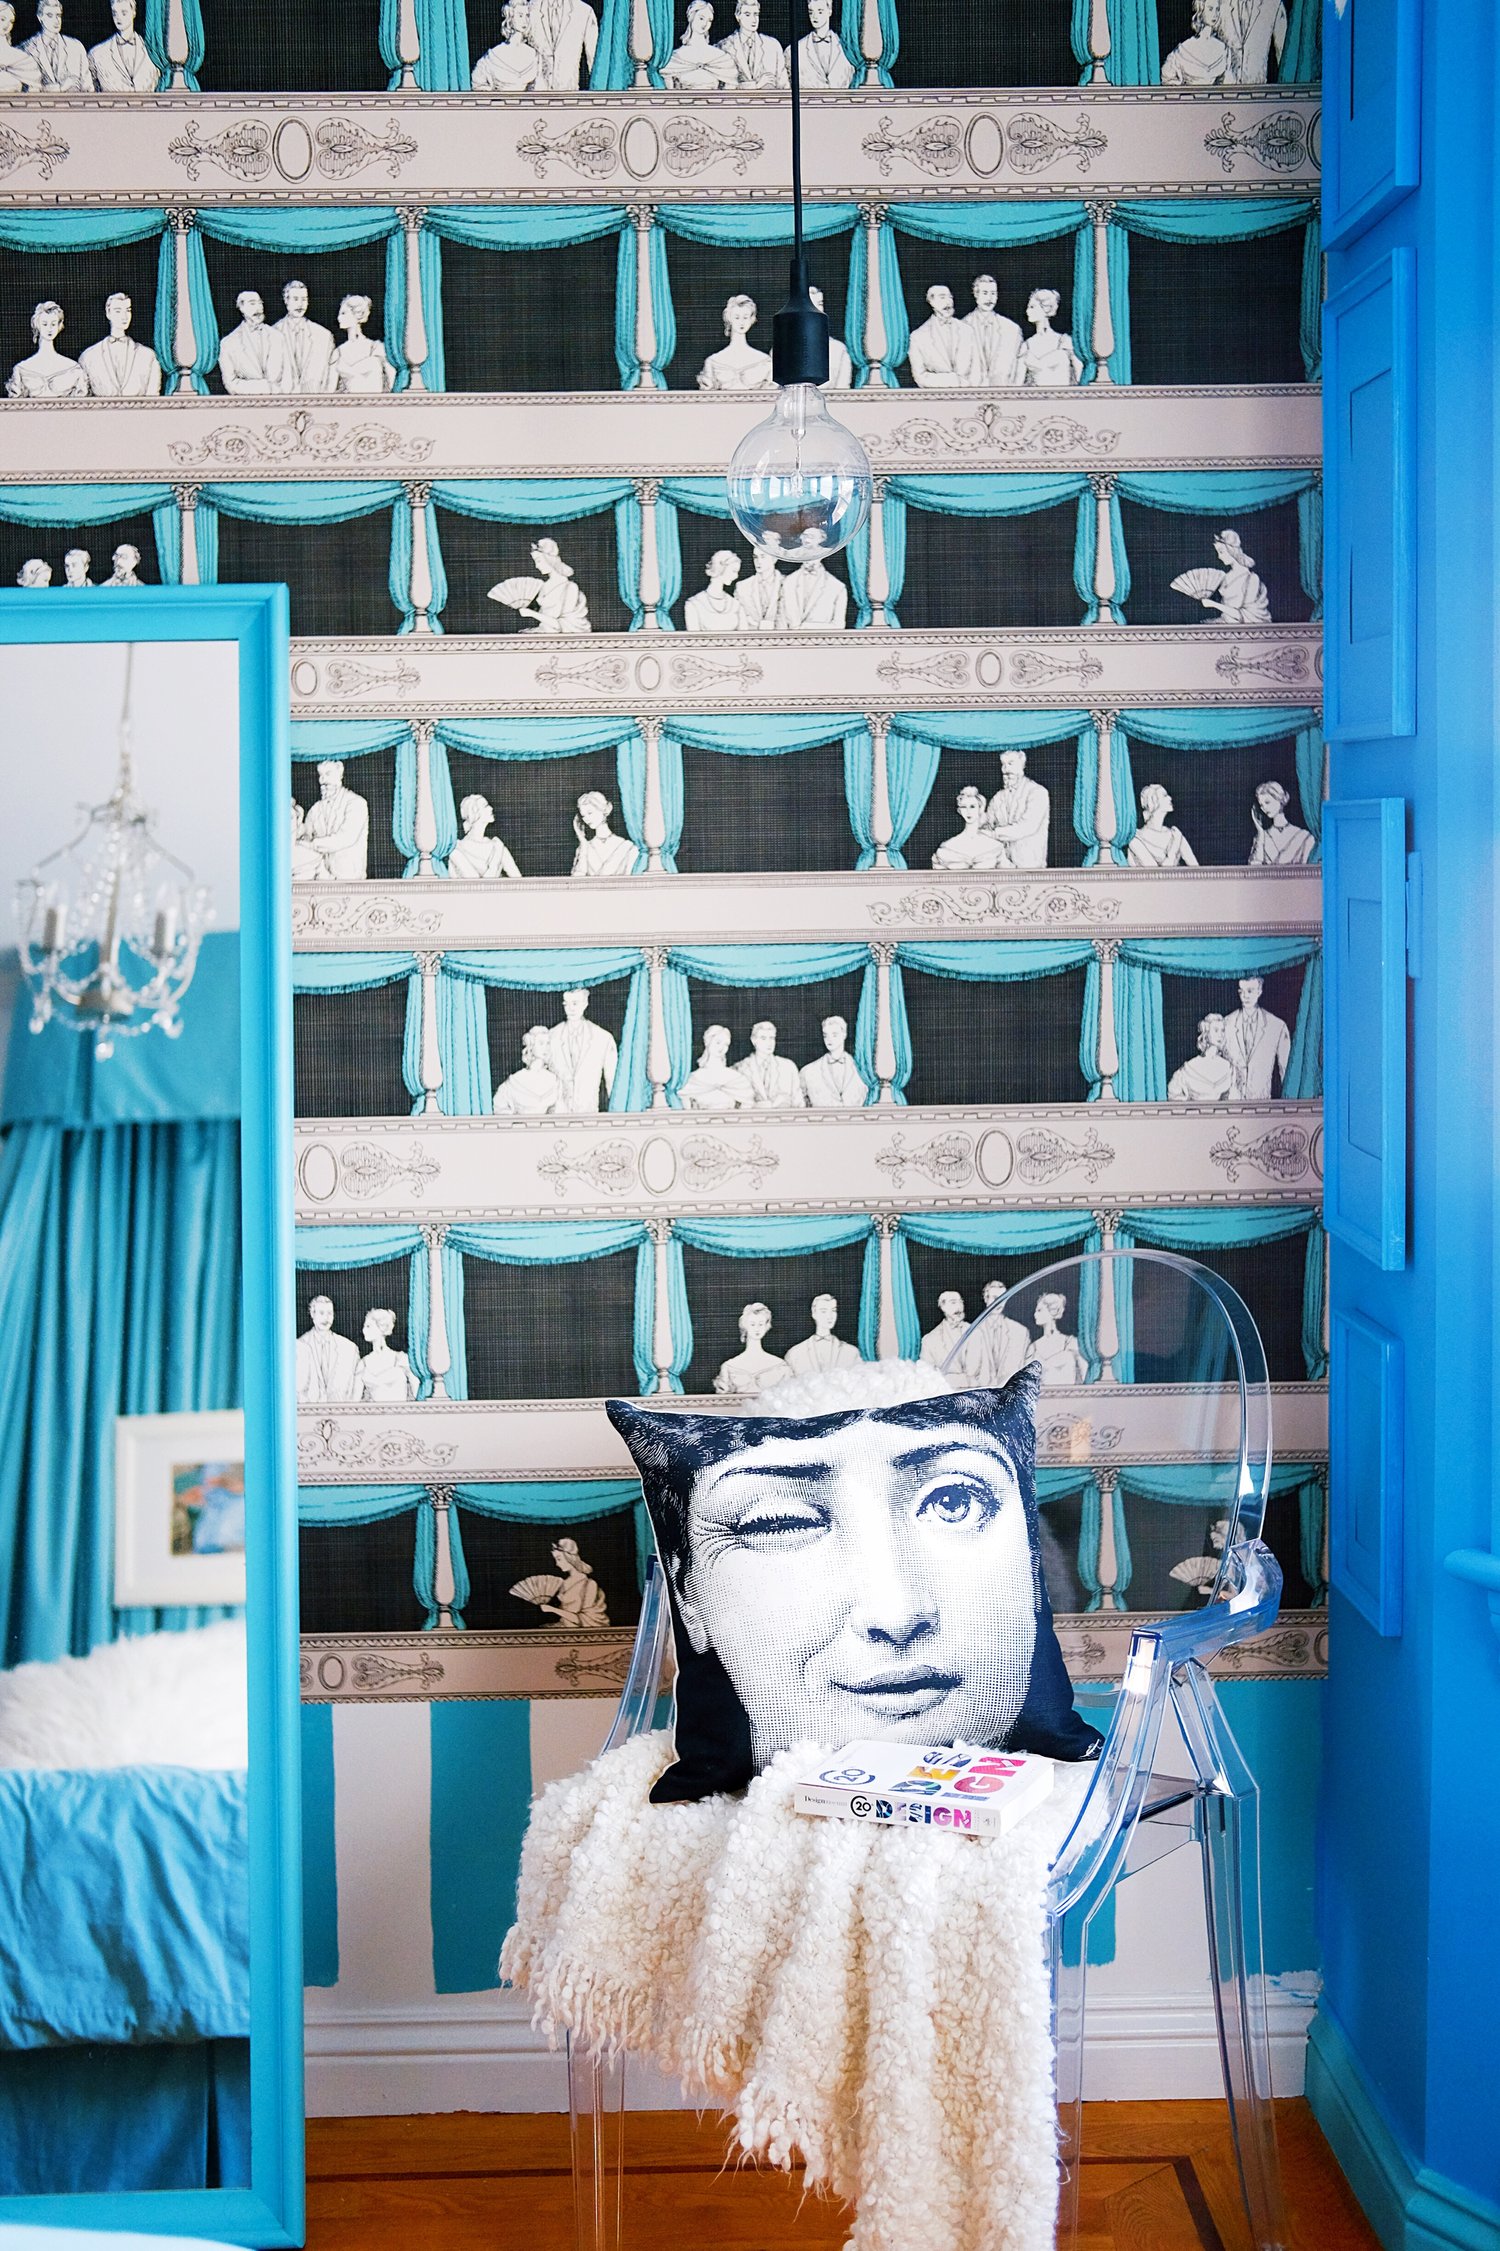 The room features whimsical wallpaper depicting vintage theater scenes, a clear chair with a winking face pillow and books, a blue-framed mirror, and a hanging bulb.